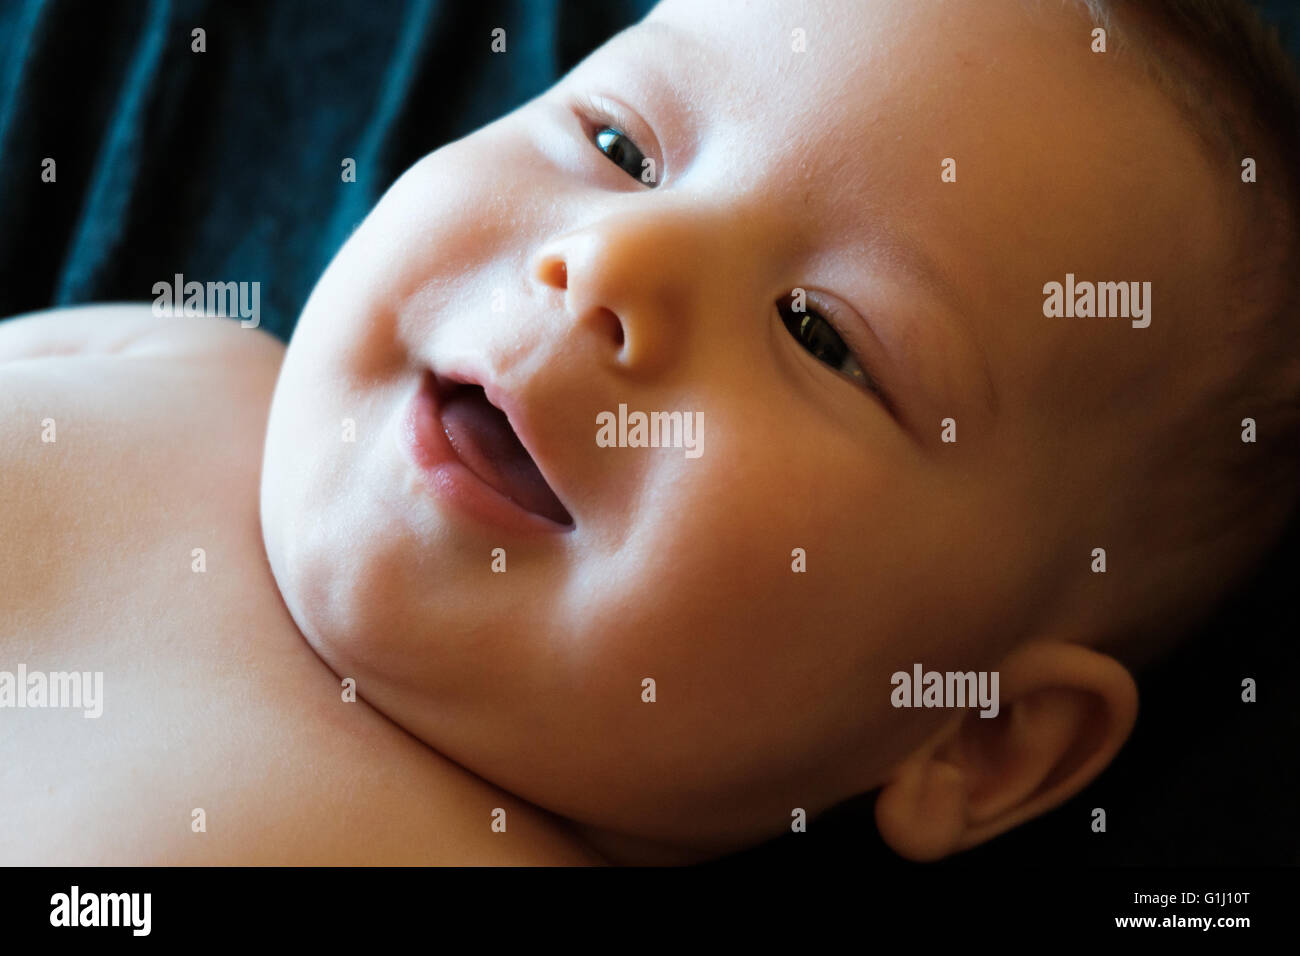 innocent baby on a black background Stock Photo